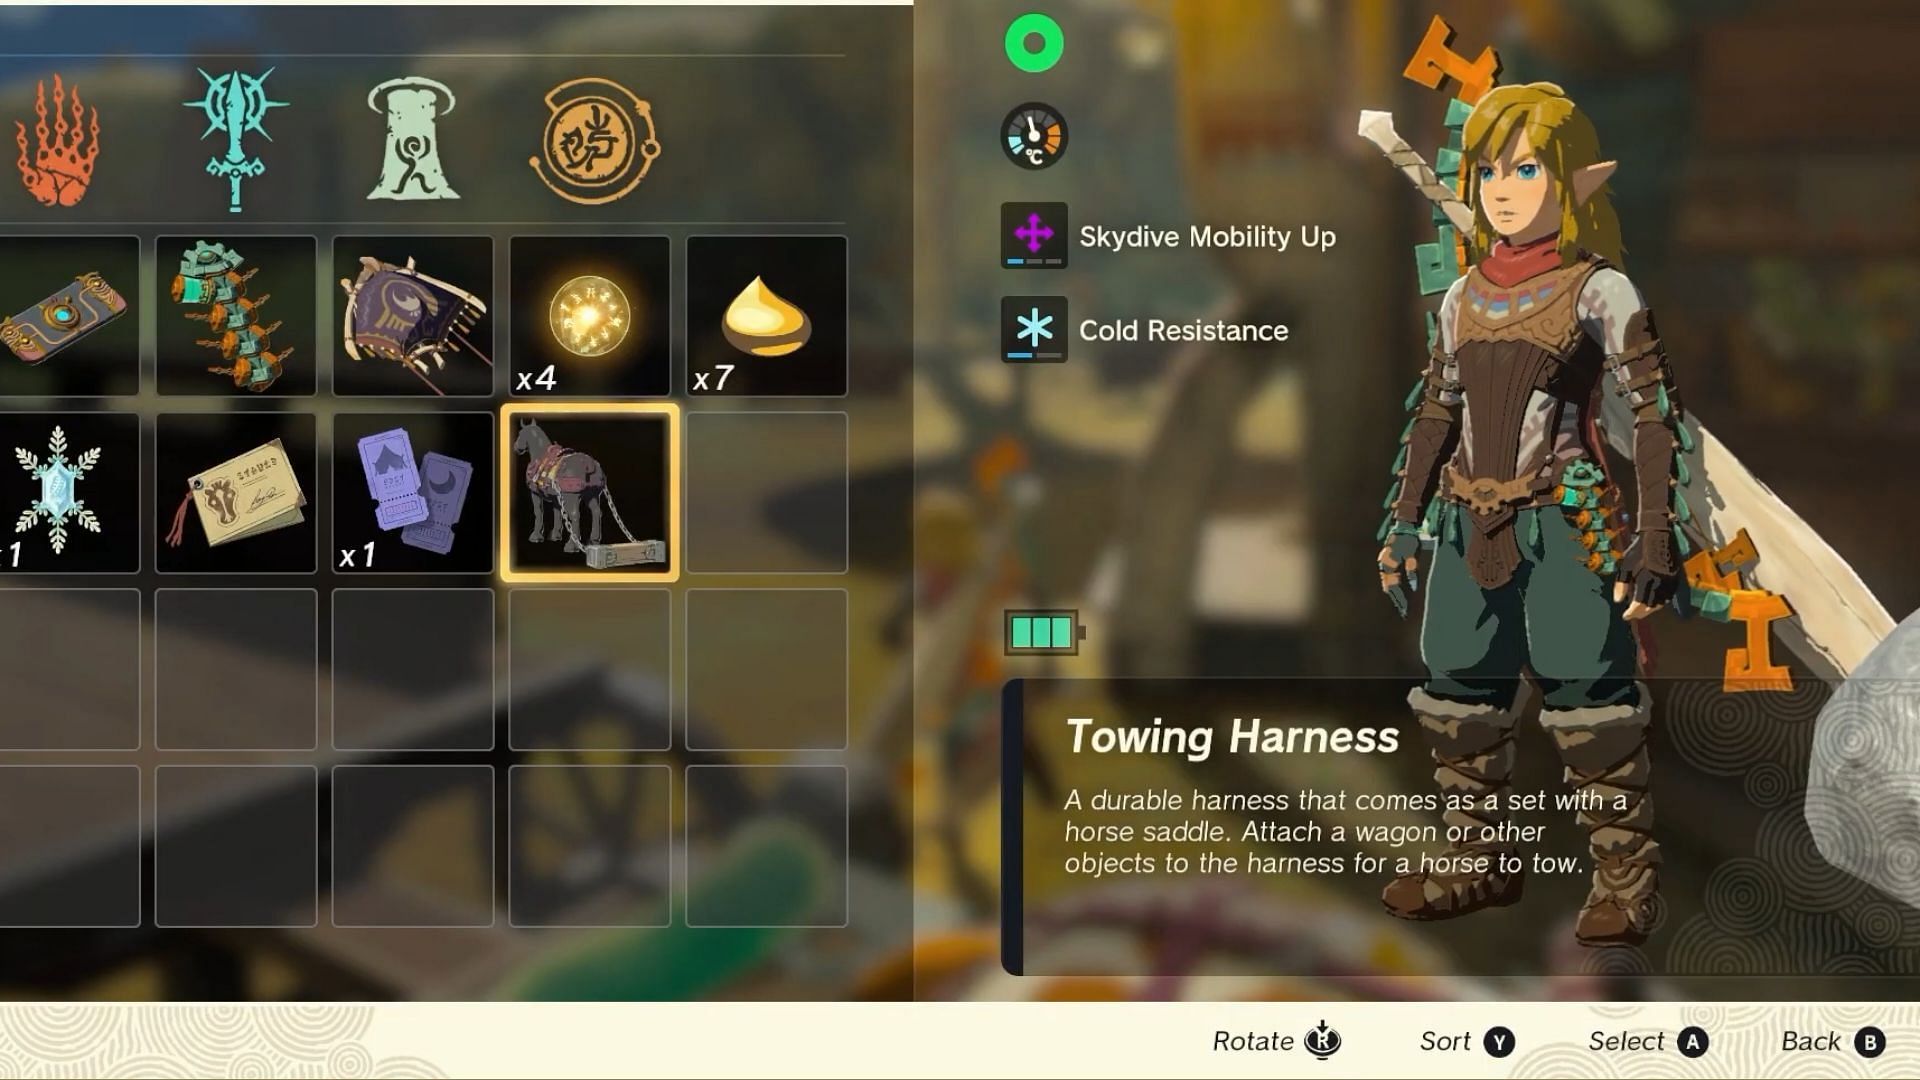 You can see the towing harness in your inventory (Image via Nintendo)